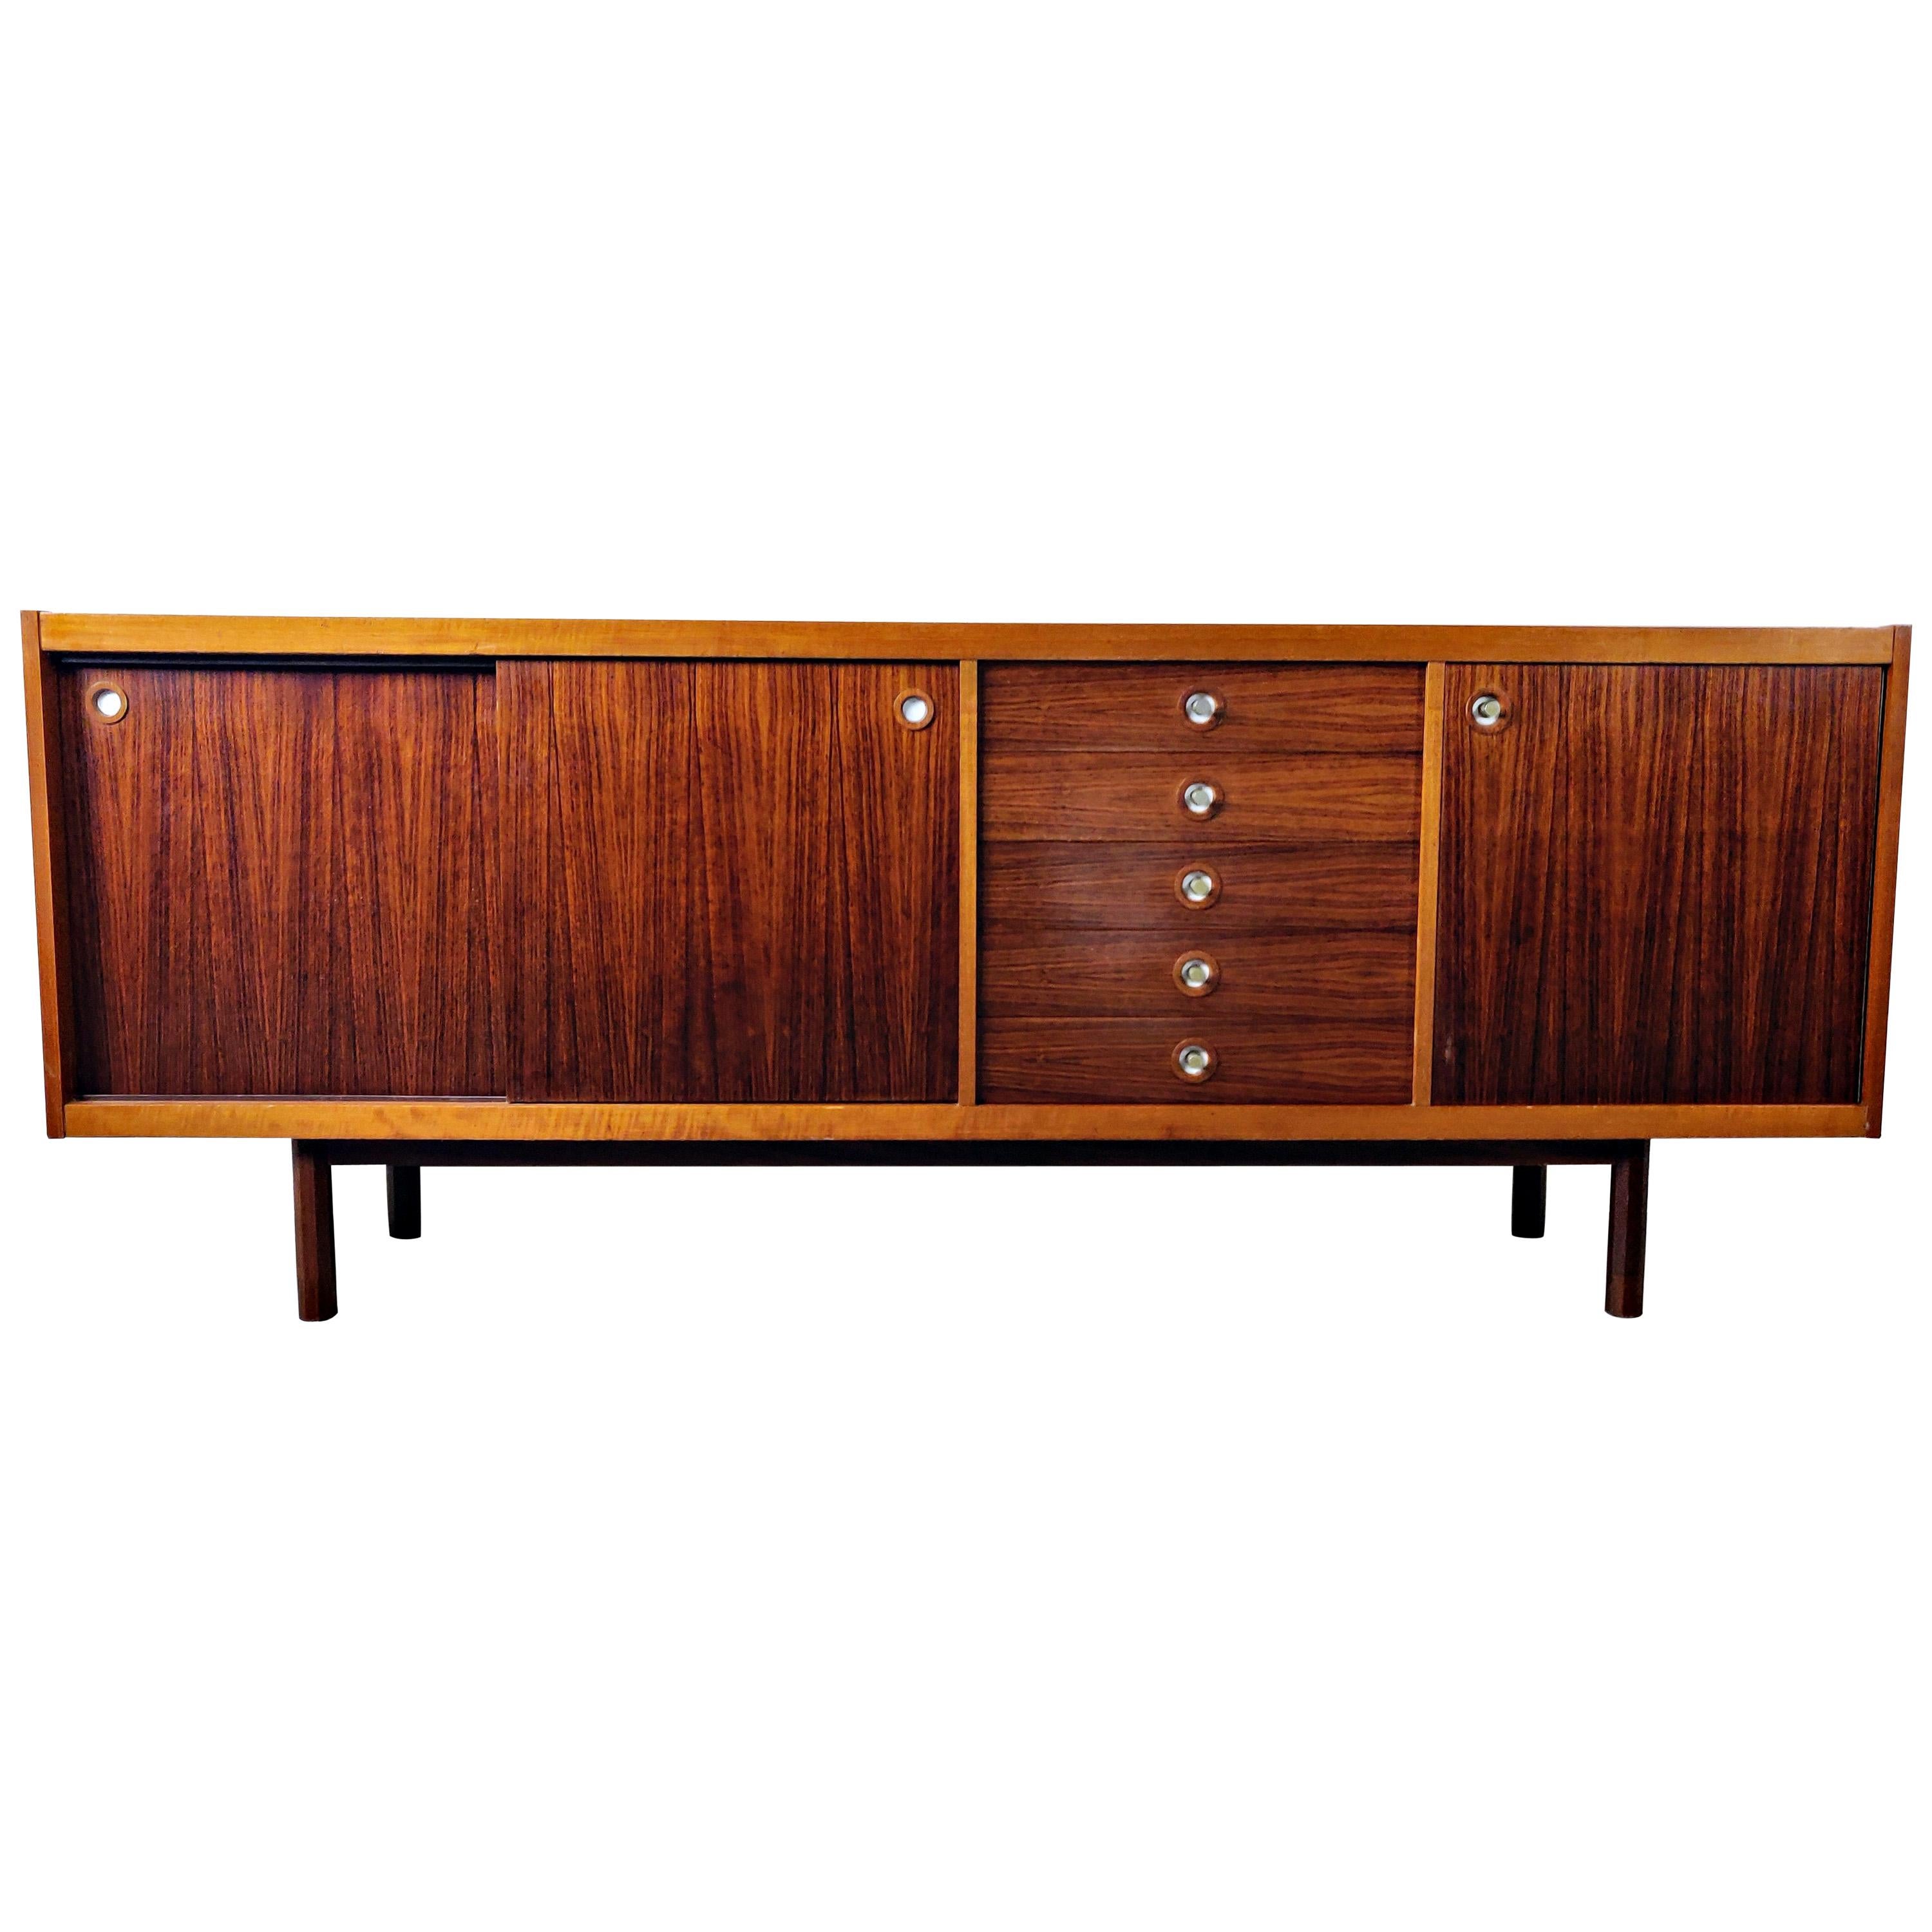 Georges Coslin Mid-Century Modern Wooden Sideboard, 1950s For Sale